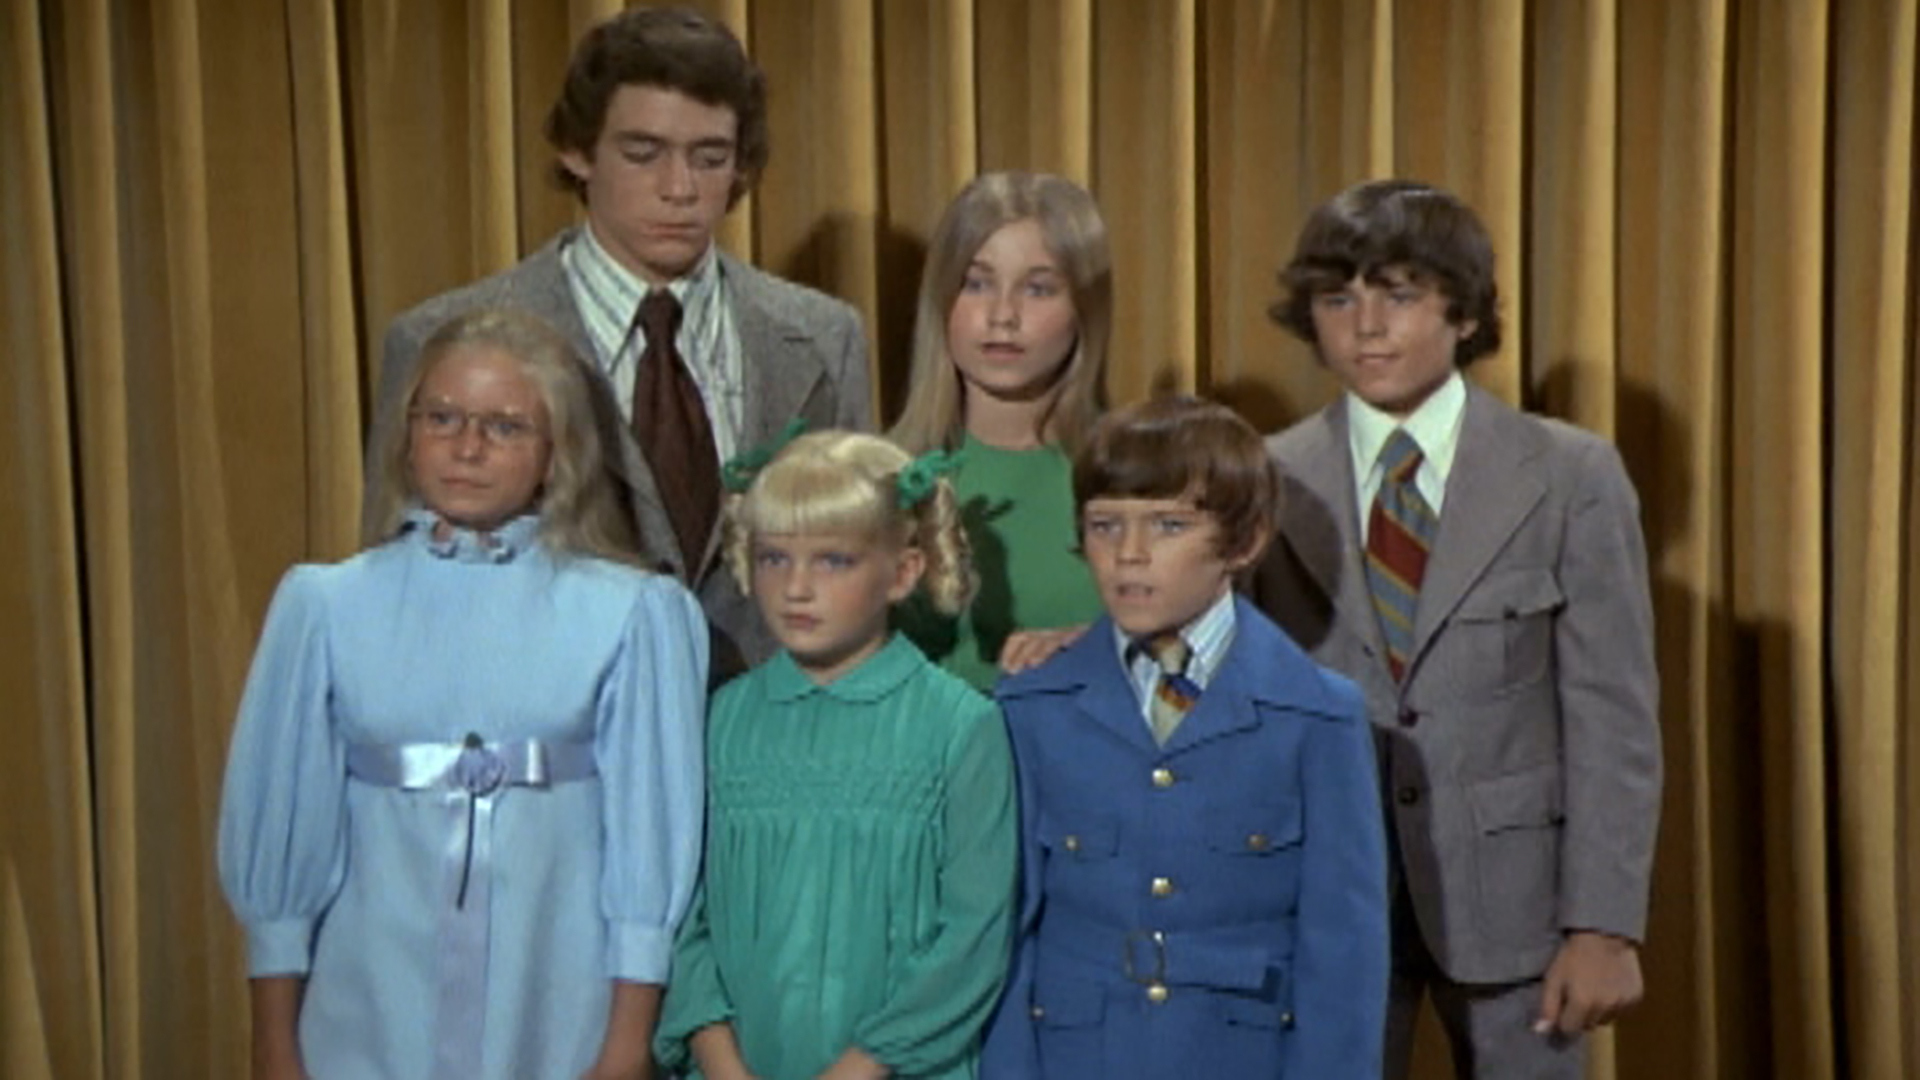 Watch The Brady Bunch Season 3 Episode 13 Not So Rosed Colored Glasses Full Show On Paramount